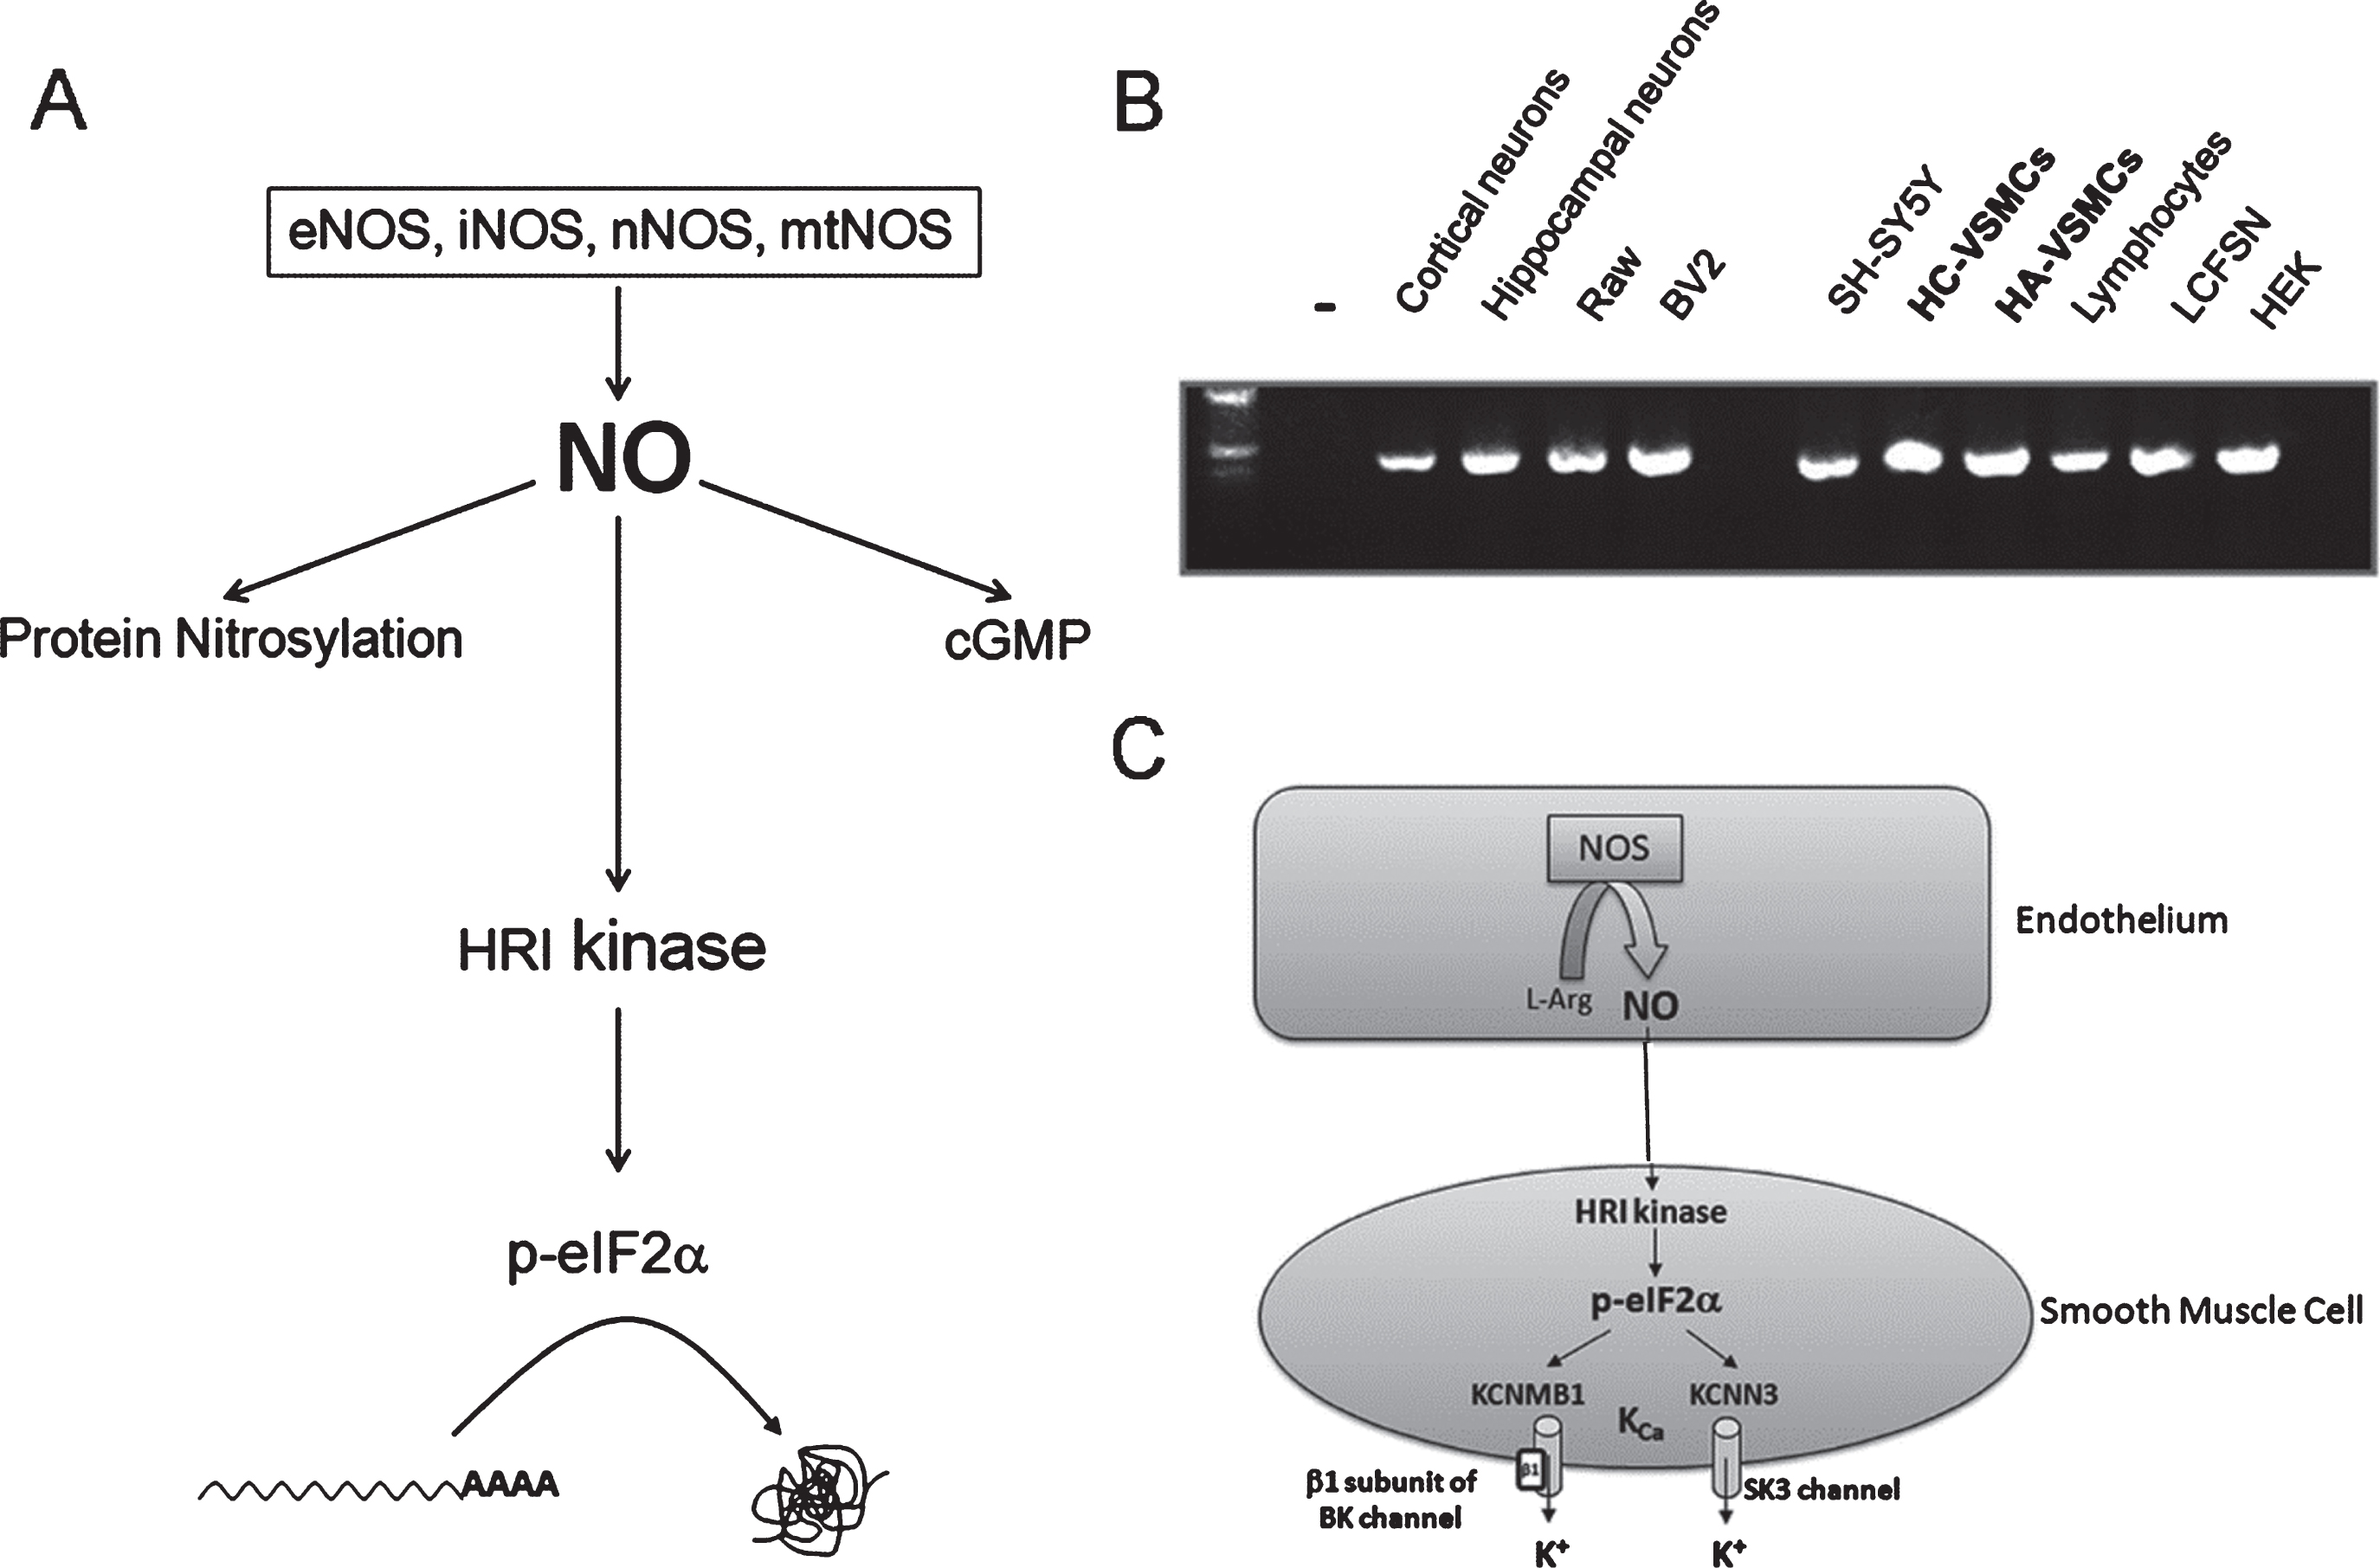 Heme-regulated eIF2α-kinase (HRI) activation by nitric oxide (NO) (A), HRI mRNA expression in different cellular types (B), and hypothetical model for NO/HRI-induced translational activation of cationic channels at the vascular wall (C). A) Diagram depicting NO-mediated signaling, including HRI kinase activation. HRI kinase activation by nitric oxide may constitute a third branch of NO-mediated intracellular signaling, by which translation initiation in uAUG-bearing transcripts becomes facilitated. B) Profile of HRI mRNA expression in different cellular types. HRI mRNA expression was detected in all the cellular types assayed, including human aortic vascular smooth cells (HA-VSMCs) and human cerebral vascular smooth cells (HC-VSMCs). (–), negative control without input RNA. C) Hypothetical model for NO/HRI-induced translational activation of cationic channels at the vascular wall. After NO is synthesized in the endothelial cells, it diffuses to the adjacent VSMC where, theoretically, it could activate the VSMC-resident HRI kinase; this would in turn facilitate the translation of uAUG-bearing transcripts such as those coding for the β1 subunit of the BK channel (KCNMB1), and the SK3 channel (KCNN3), respectively. Both cationic channels depicted in the figure (KCNMB1 and KCNN3) are calcium activated potassium channels (K
Ca). eNOS, endothelial nitric oxide synthase; nNOS, neuronal nitric oxide synthase; mtNOS, mitochondrial nitric oxide synthase; iNOS, inducible nitric oxide synthase; Cell lines: Raw, macrophages; BV2, microglia; SH-SY5Y: human neuroblastoma; LCFSN: traqueal epithelial. Primers used for semi-quantitative RT-PCR amplification: AGGAACAAGCGGAGCCG(mHRI_F); CCGACCAGTCCTTACGCC (mHRI_R). [446 bp amplicon].